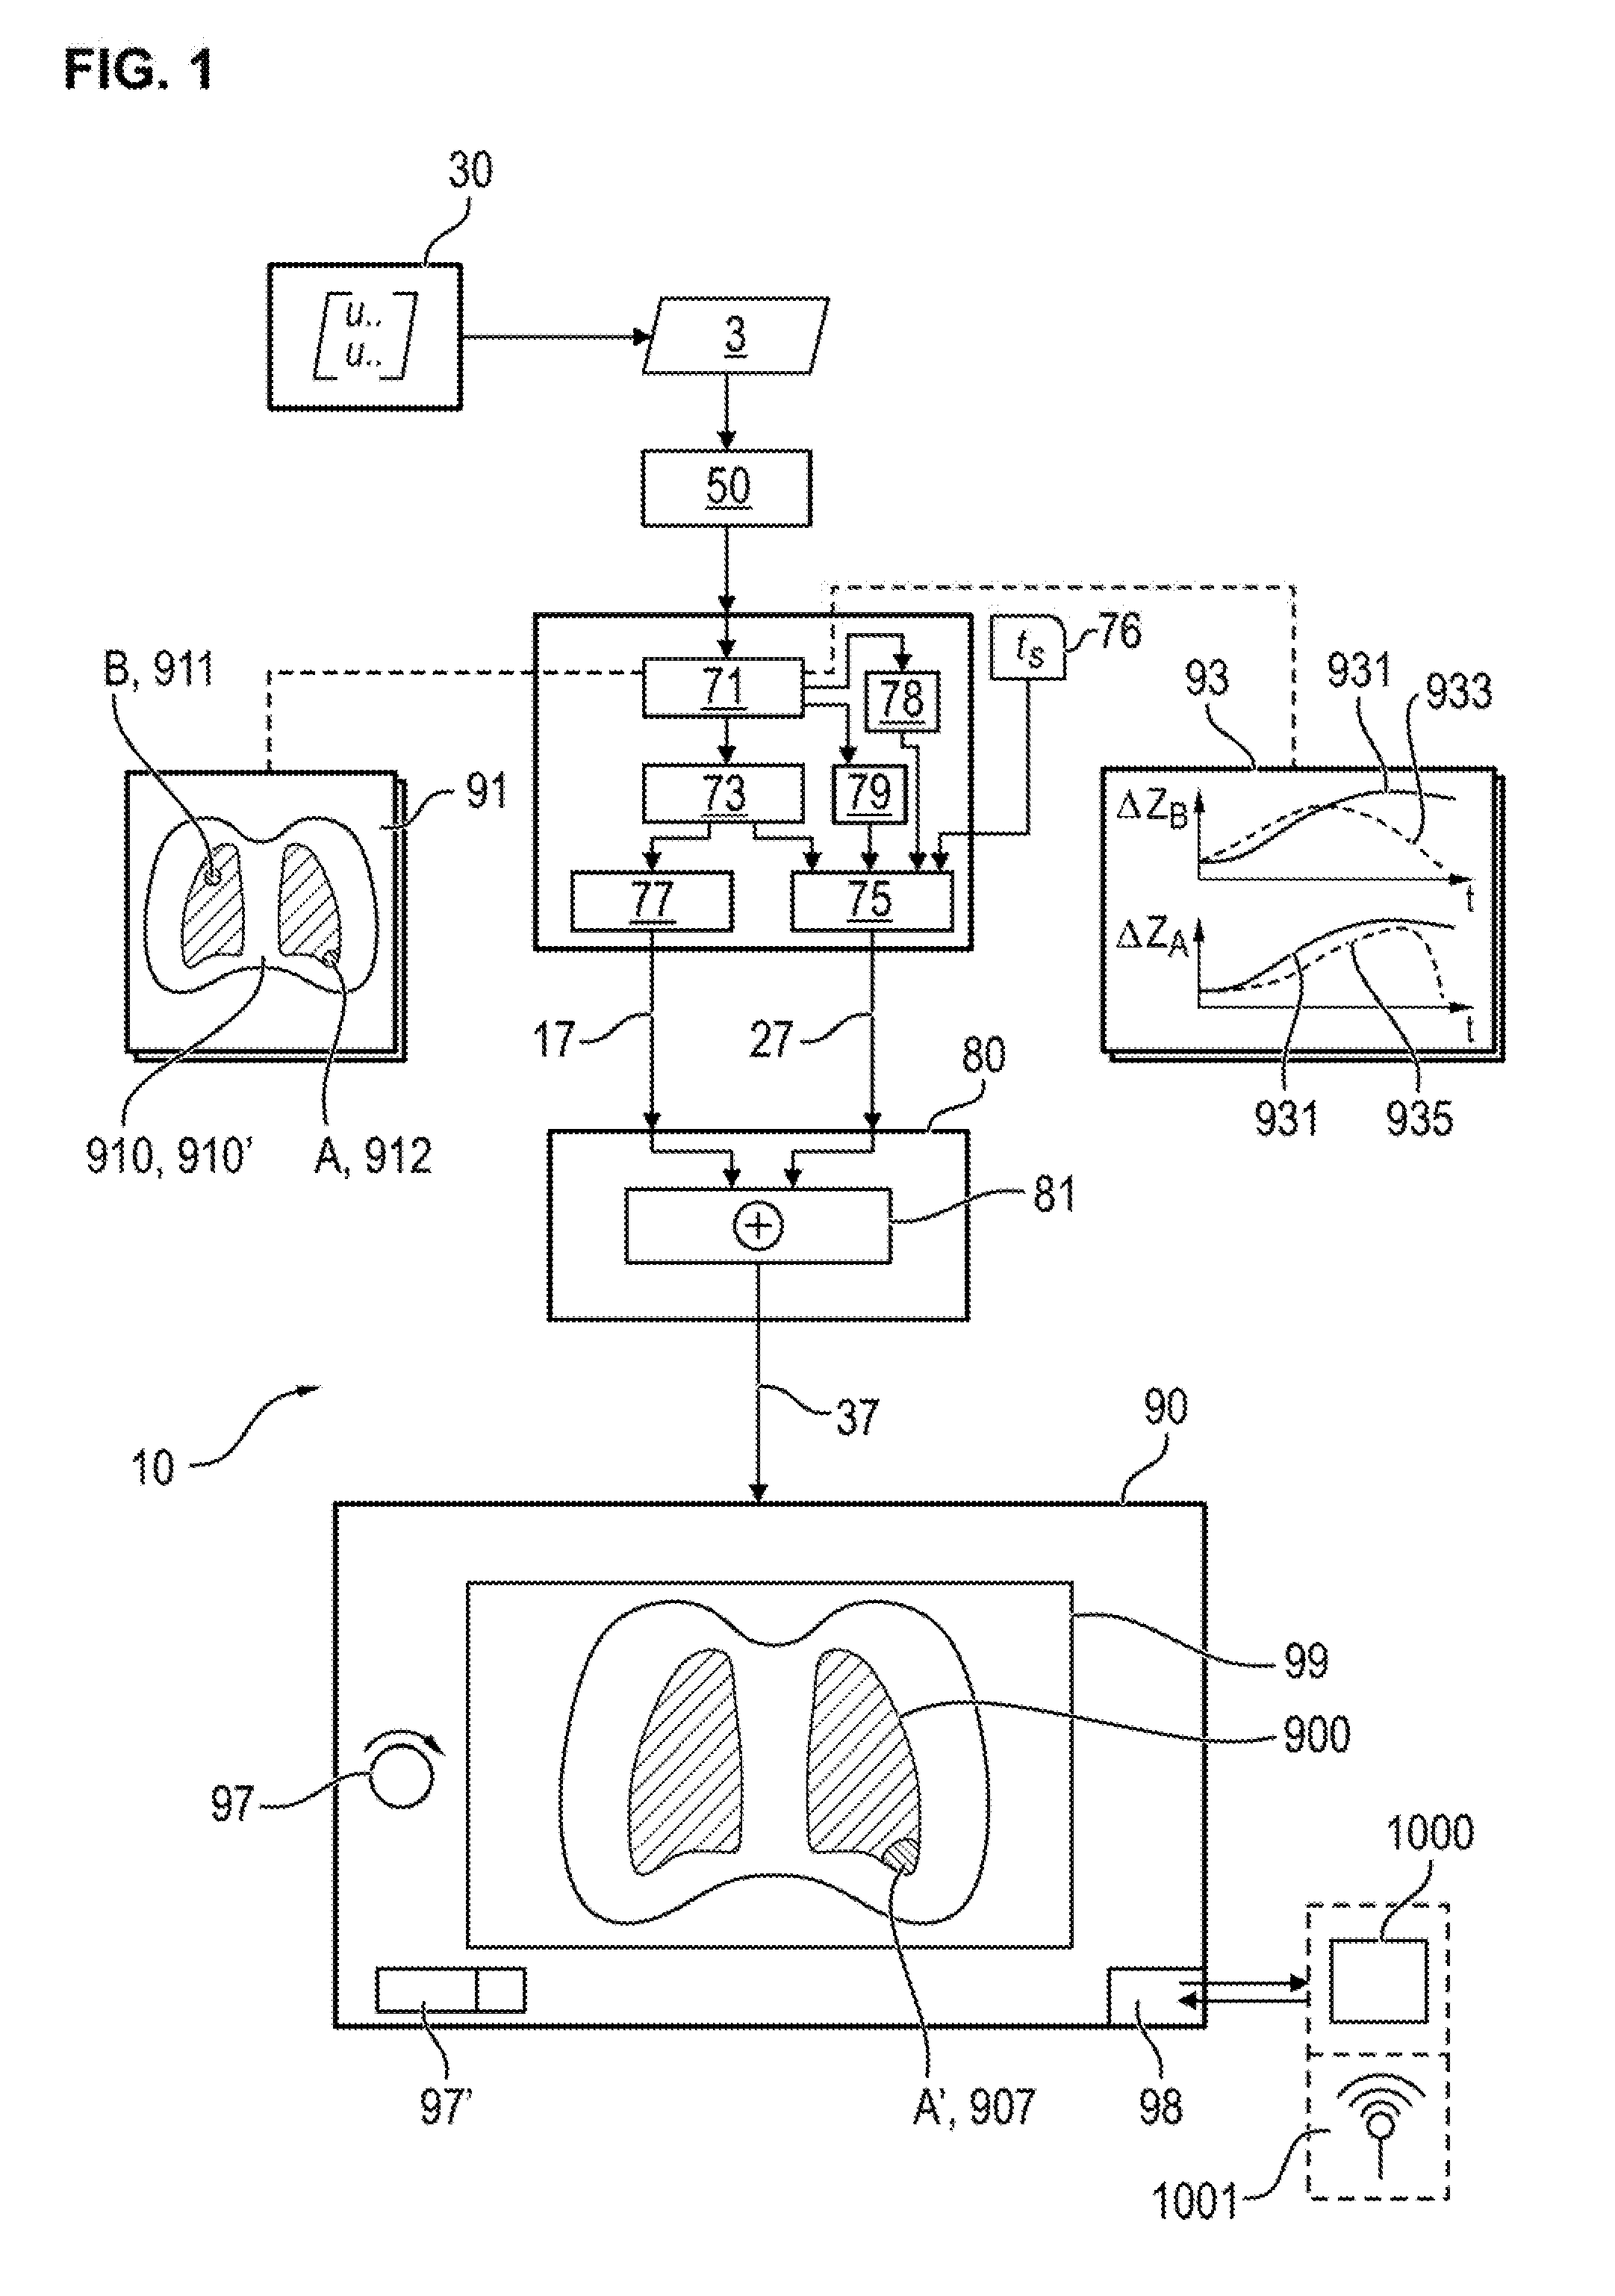 Device for processing and visualizing data of an electric impedance tomography apparatus for determining and visualizing regional ventilation delays in the lungs